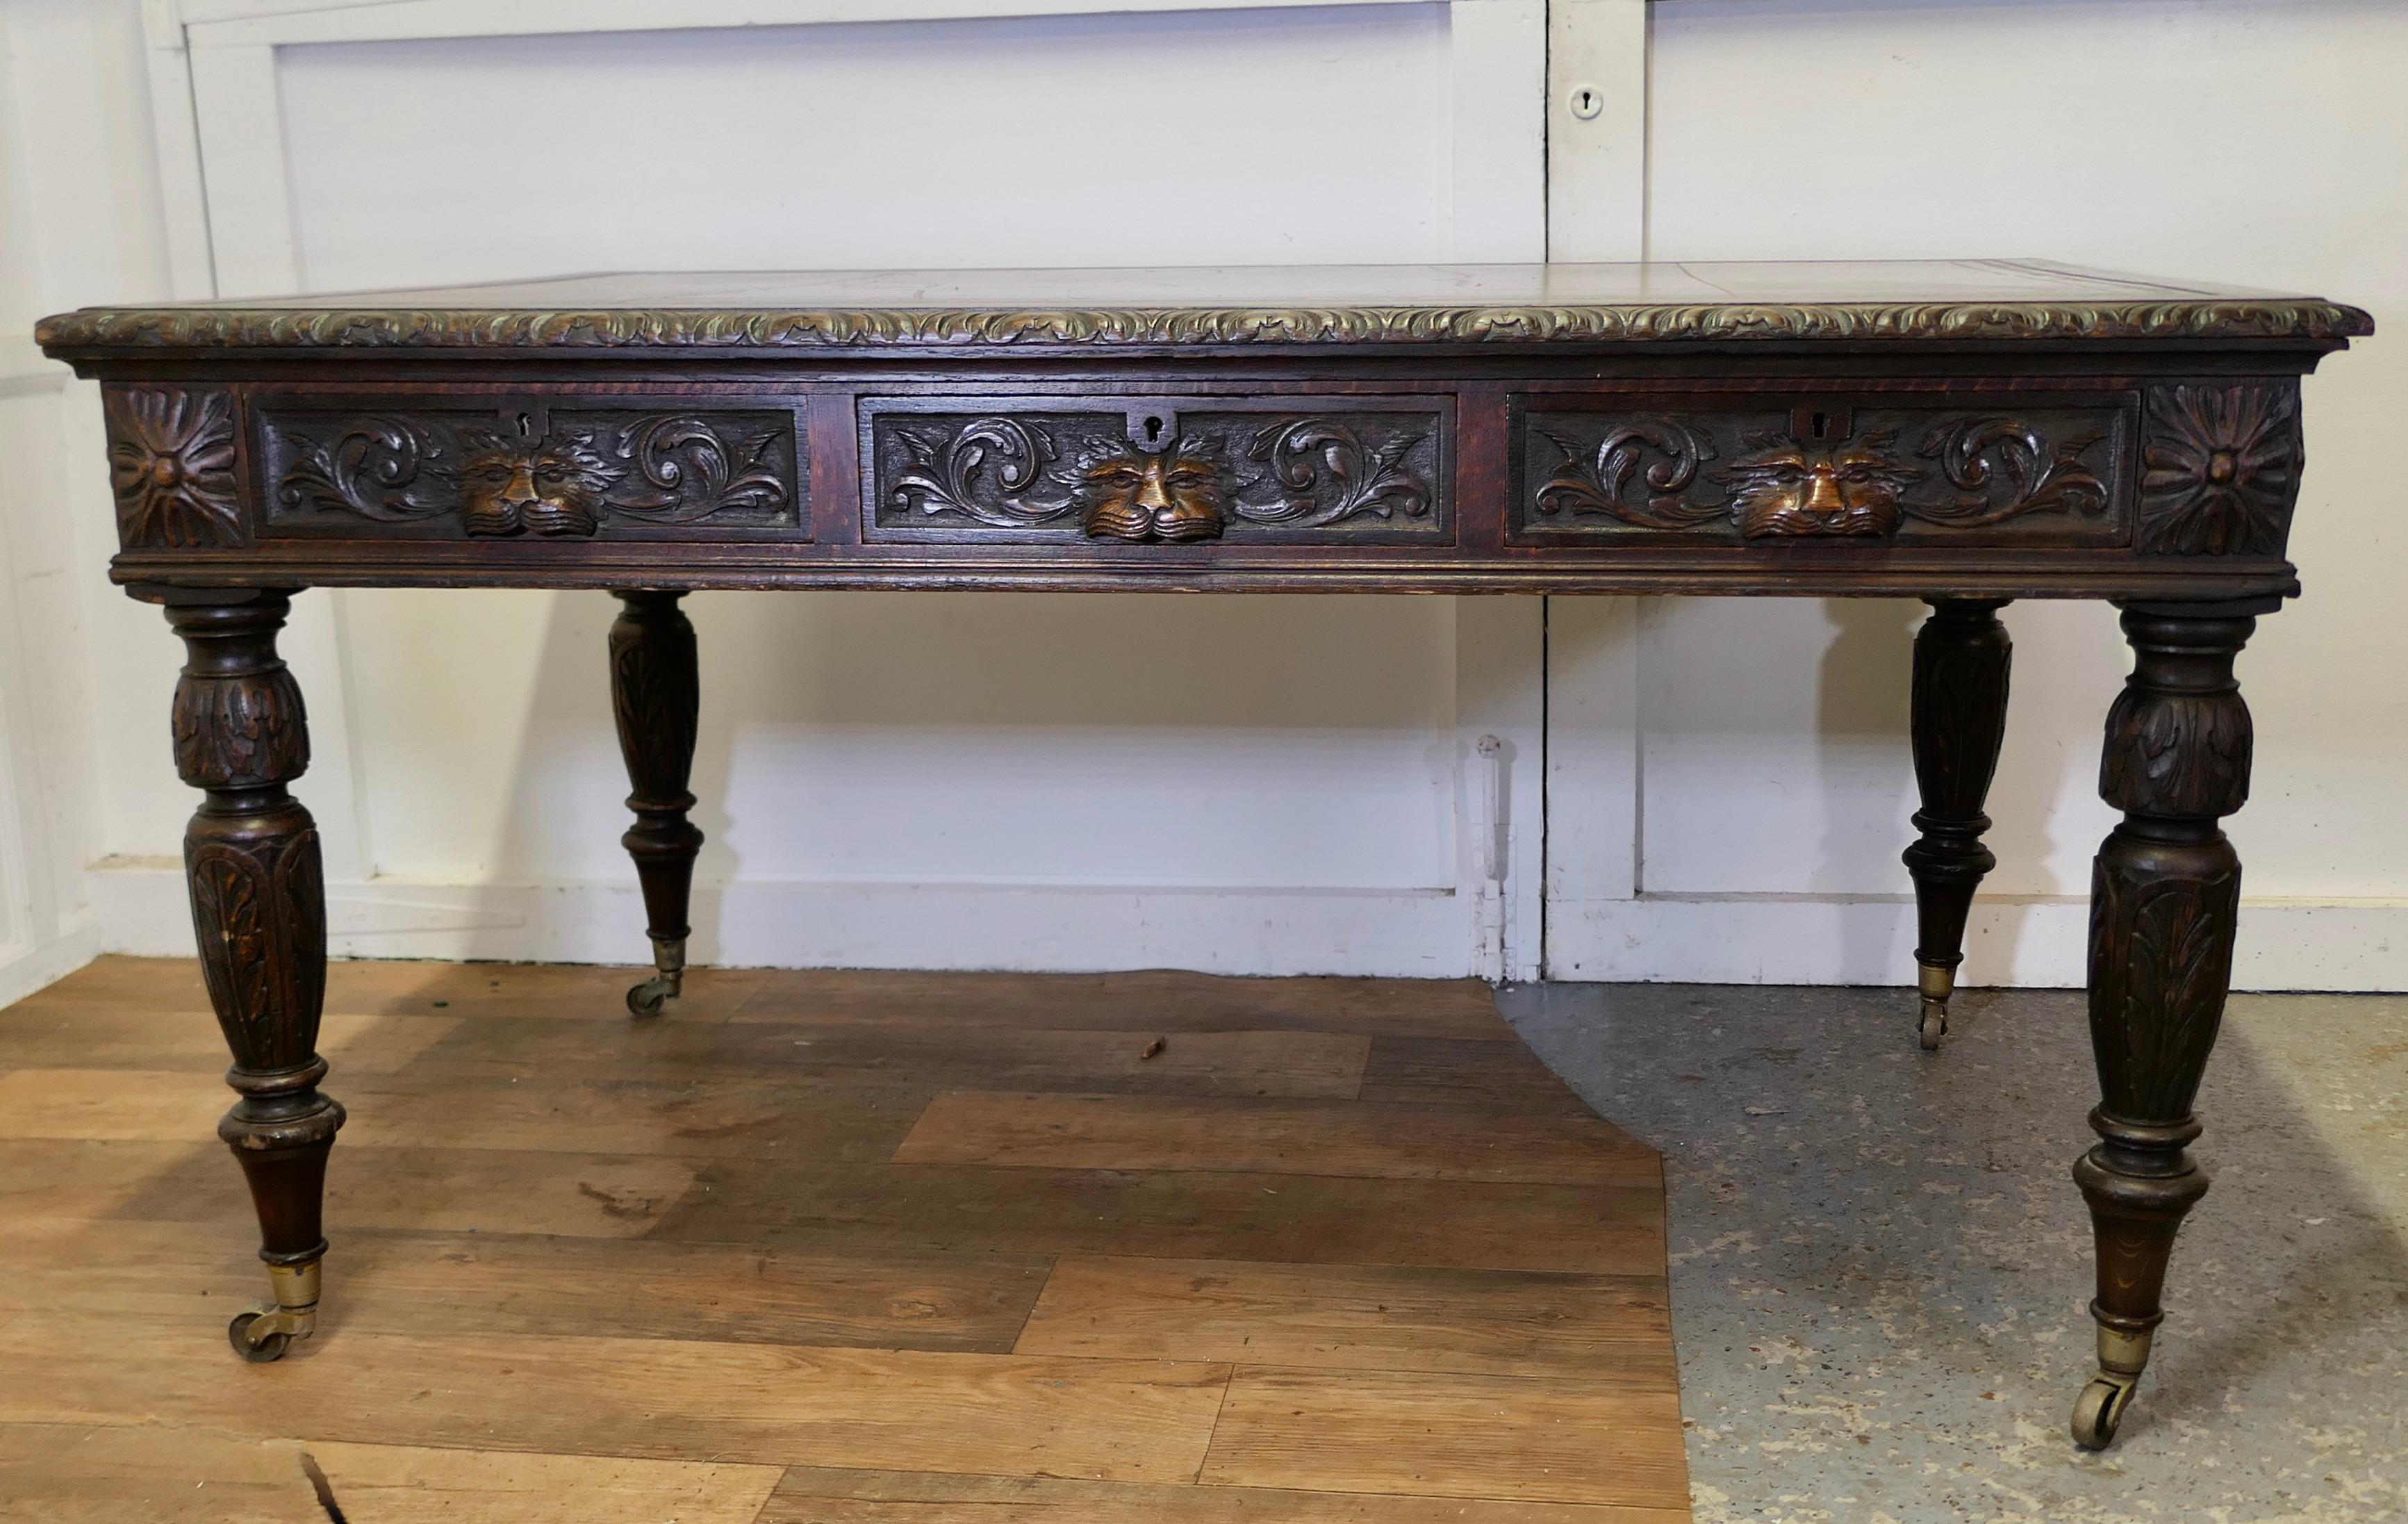  Large Victorian Oak Leather Top Partners Desk, EDWARDS & ROBERTS Library Table

This is a large piece, the table stands on heavy turned and carved legs set on brass casters, it has 3 drawers set into the apron along each side, these have superbly